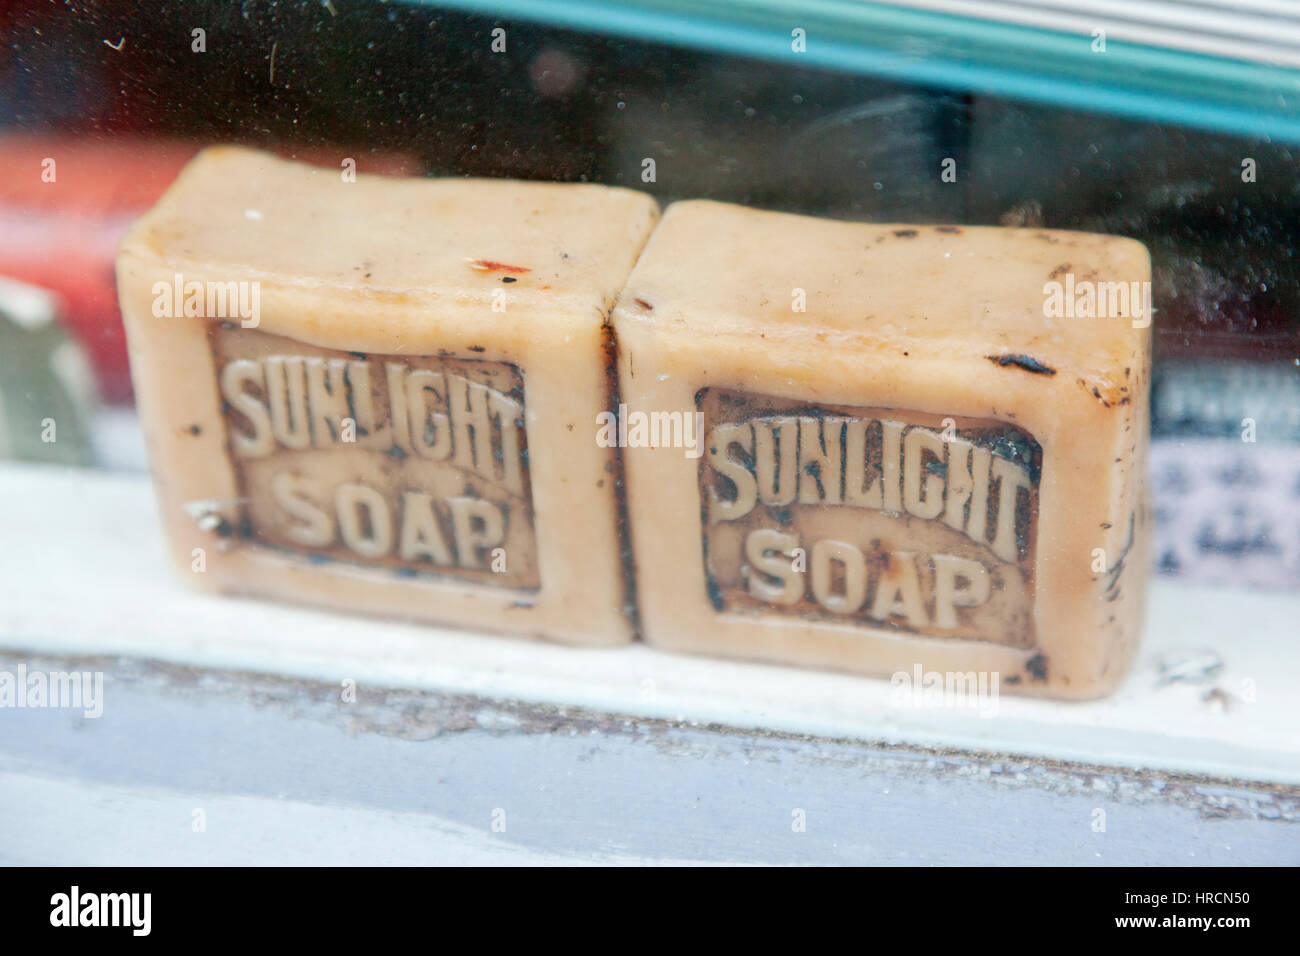 Two bars of Sunlight Soap Stock Photo